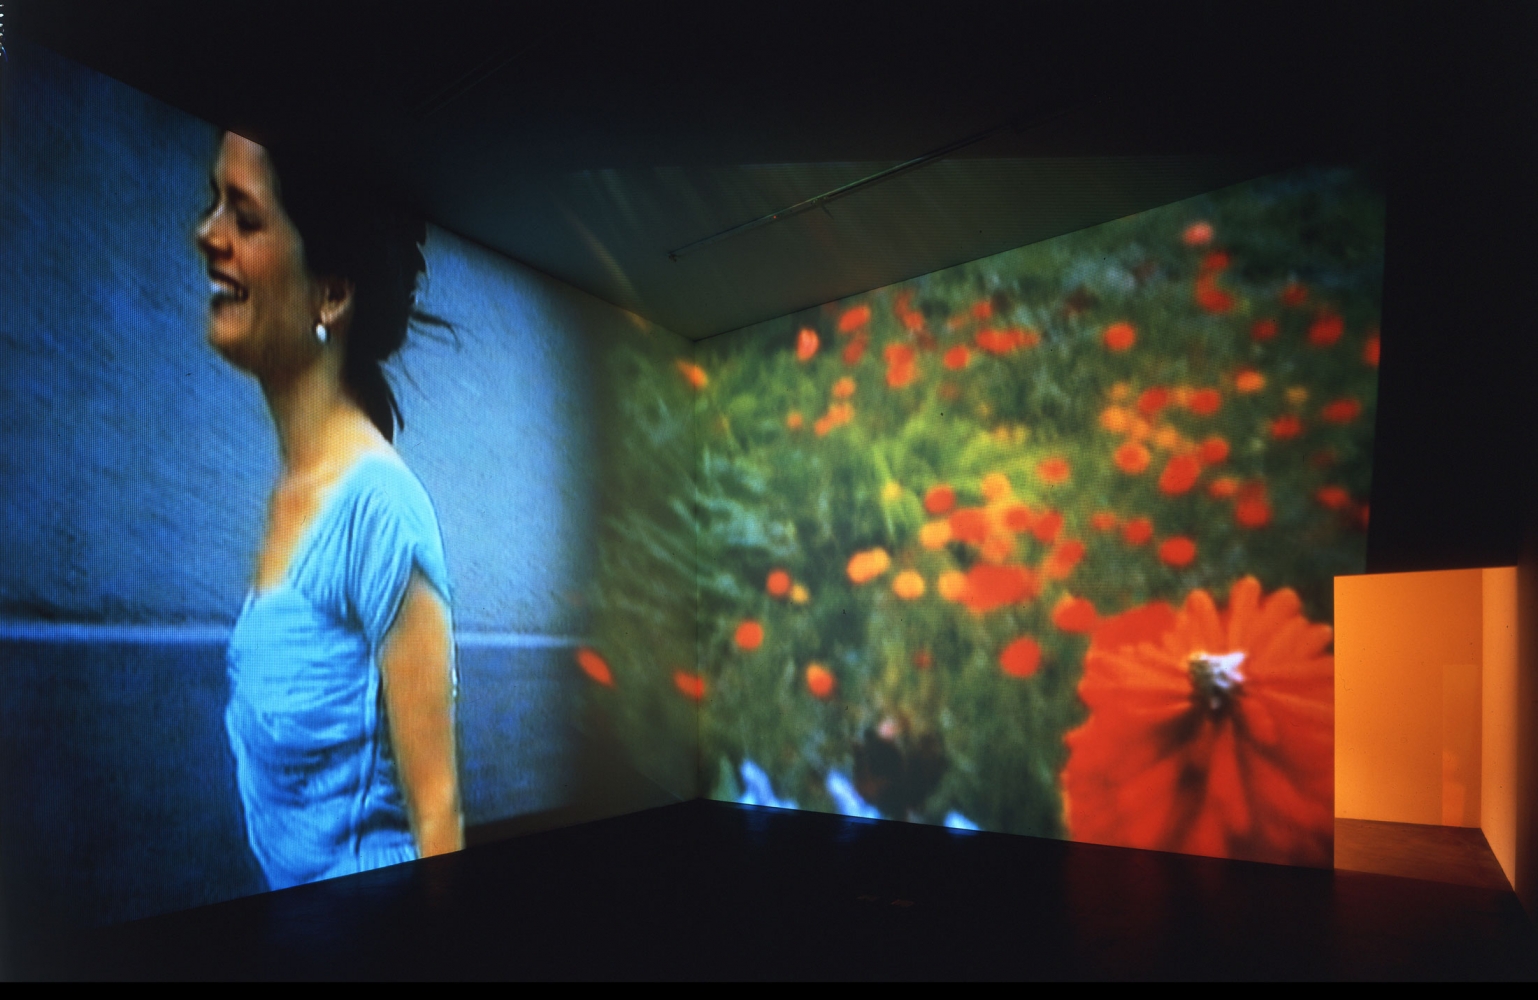 Pipilotti Rist
Ever Is Over All, 1997
Two-channel video, sound
Duration: 8 minutes, 25 seconds